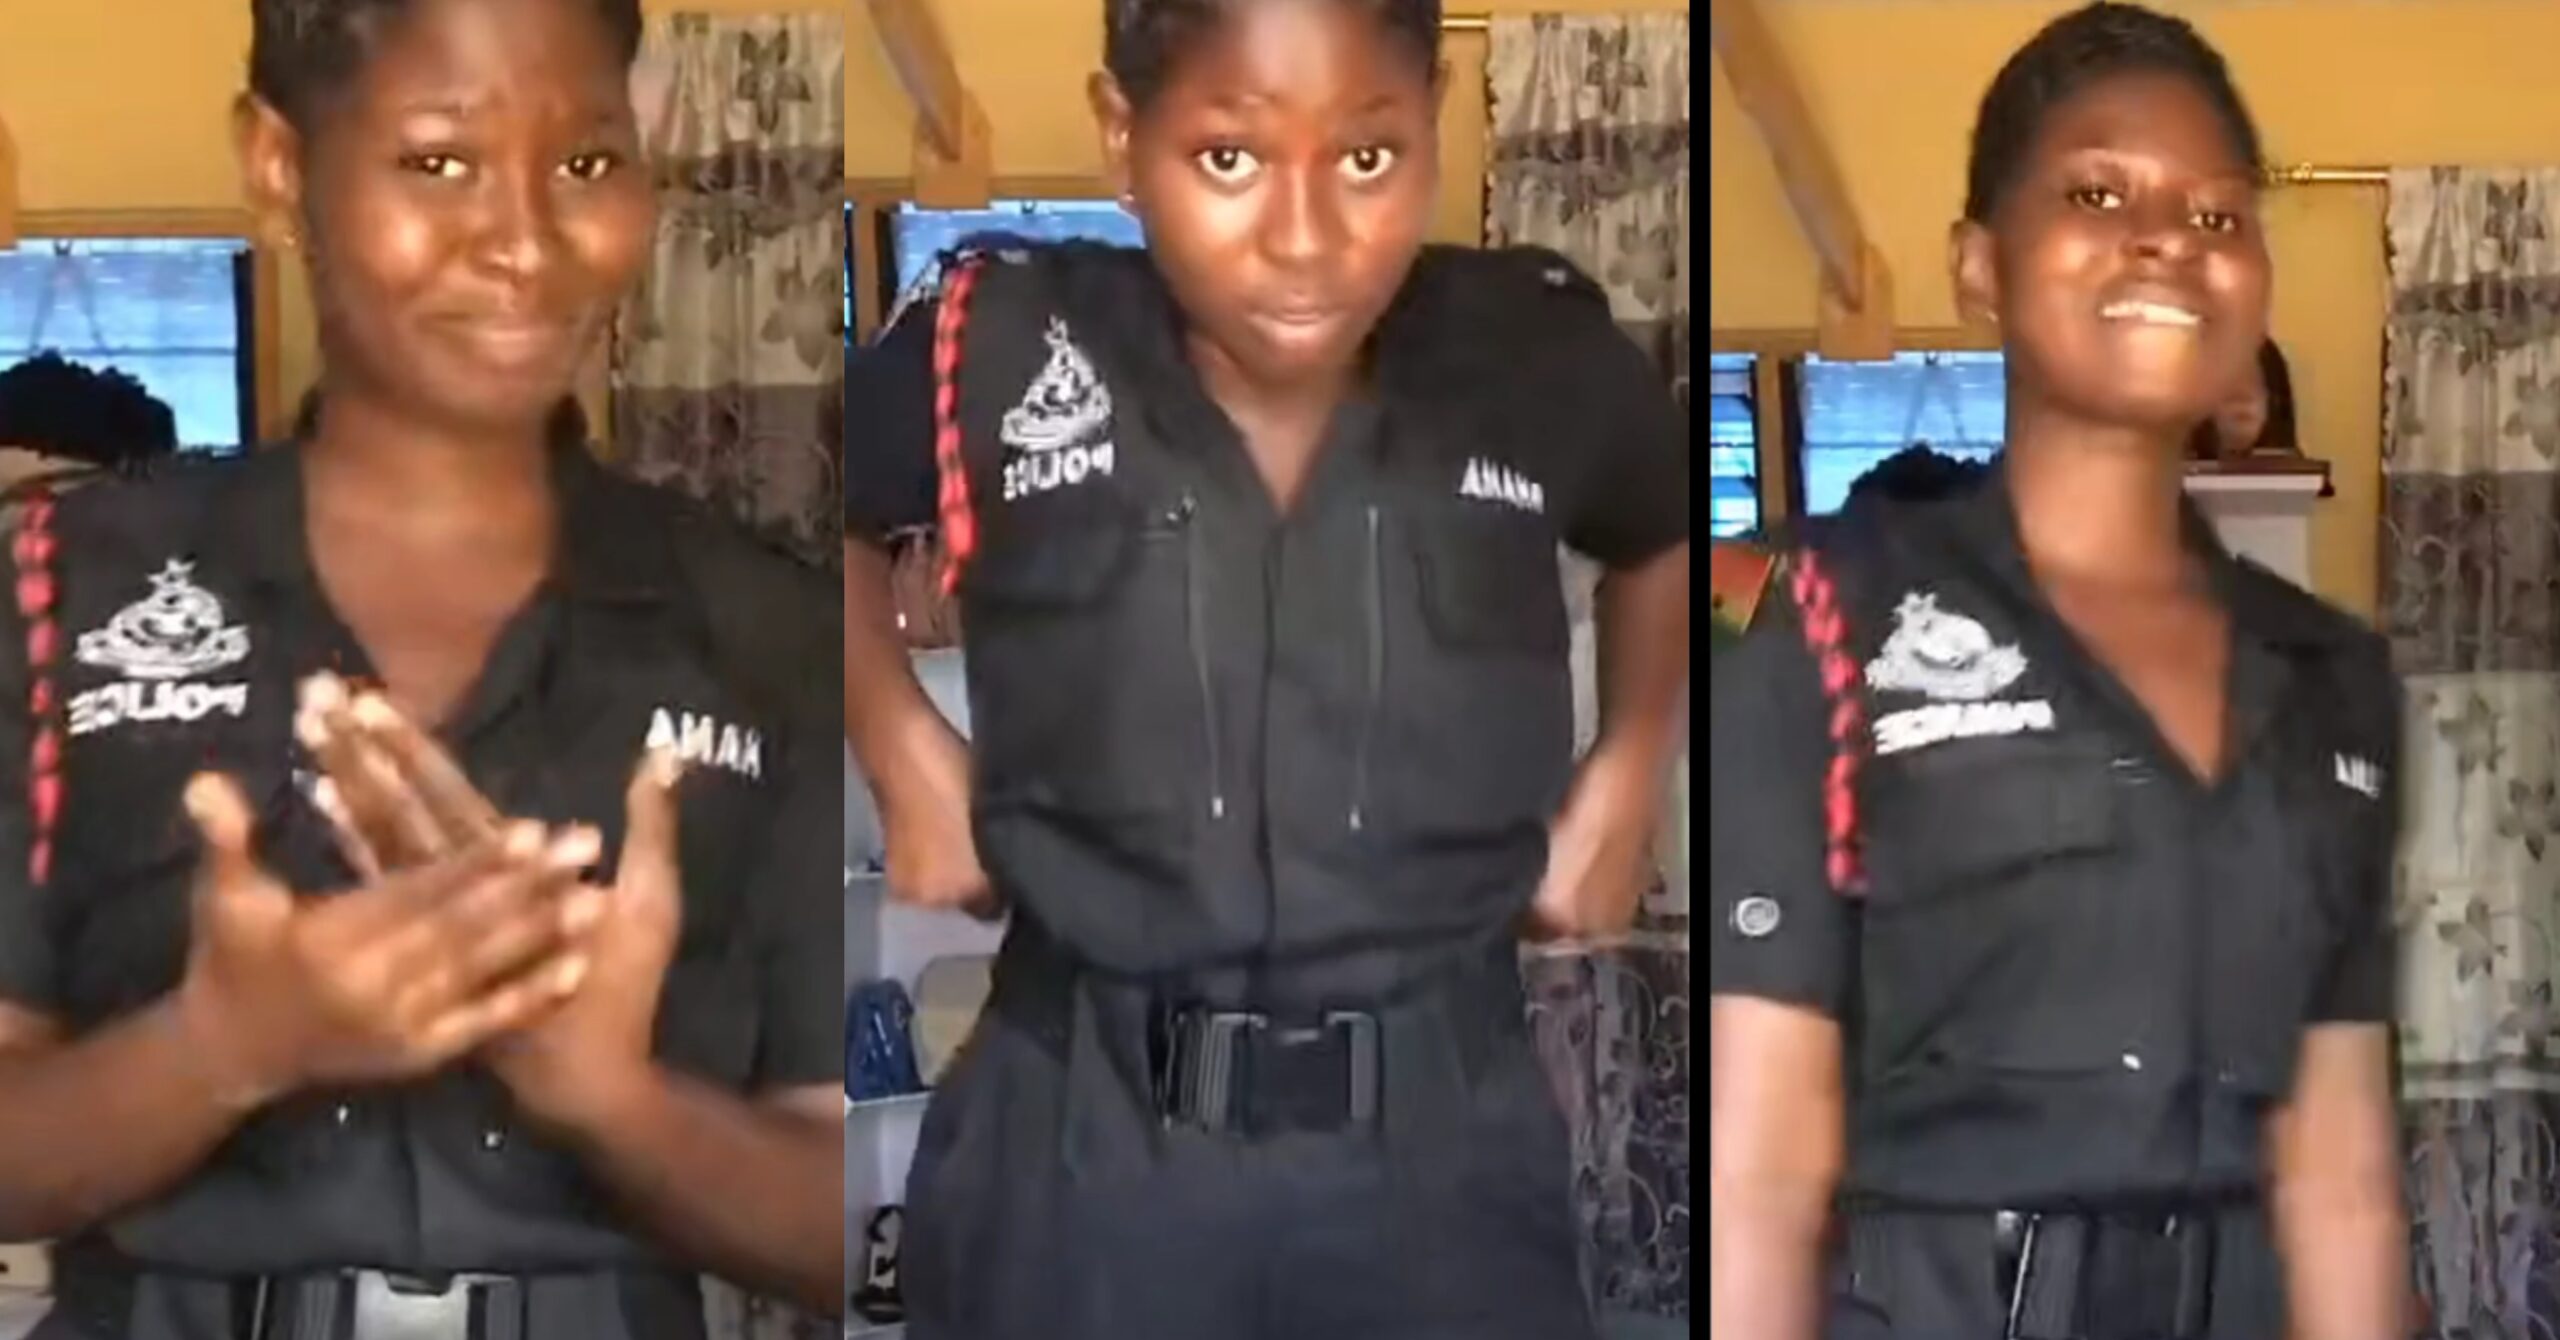 "My Uniform won't permit me to tw(e)rk"- Pretty Police Officer says